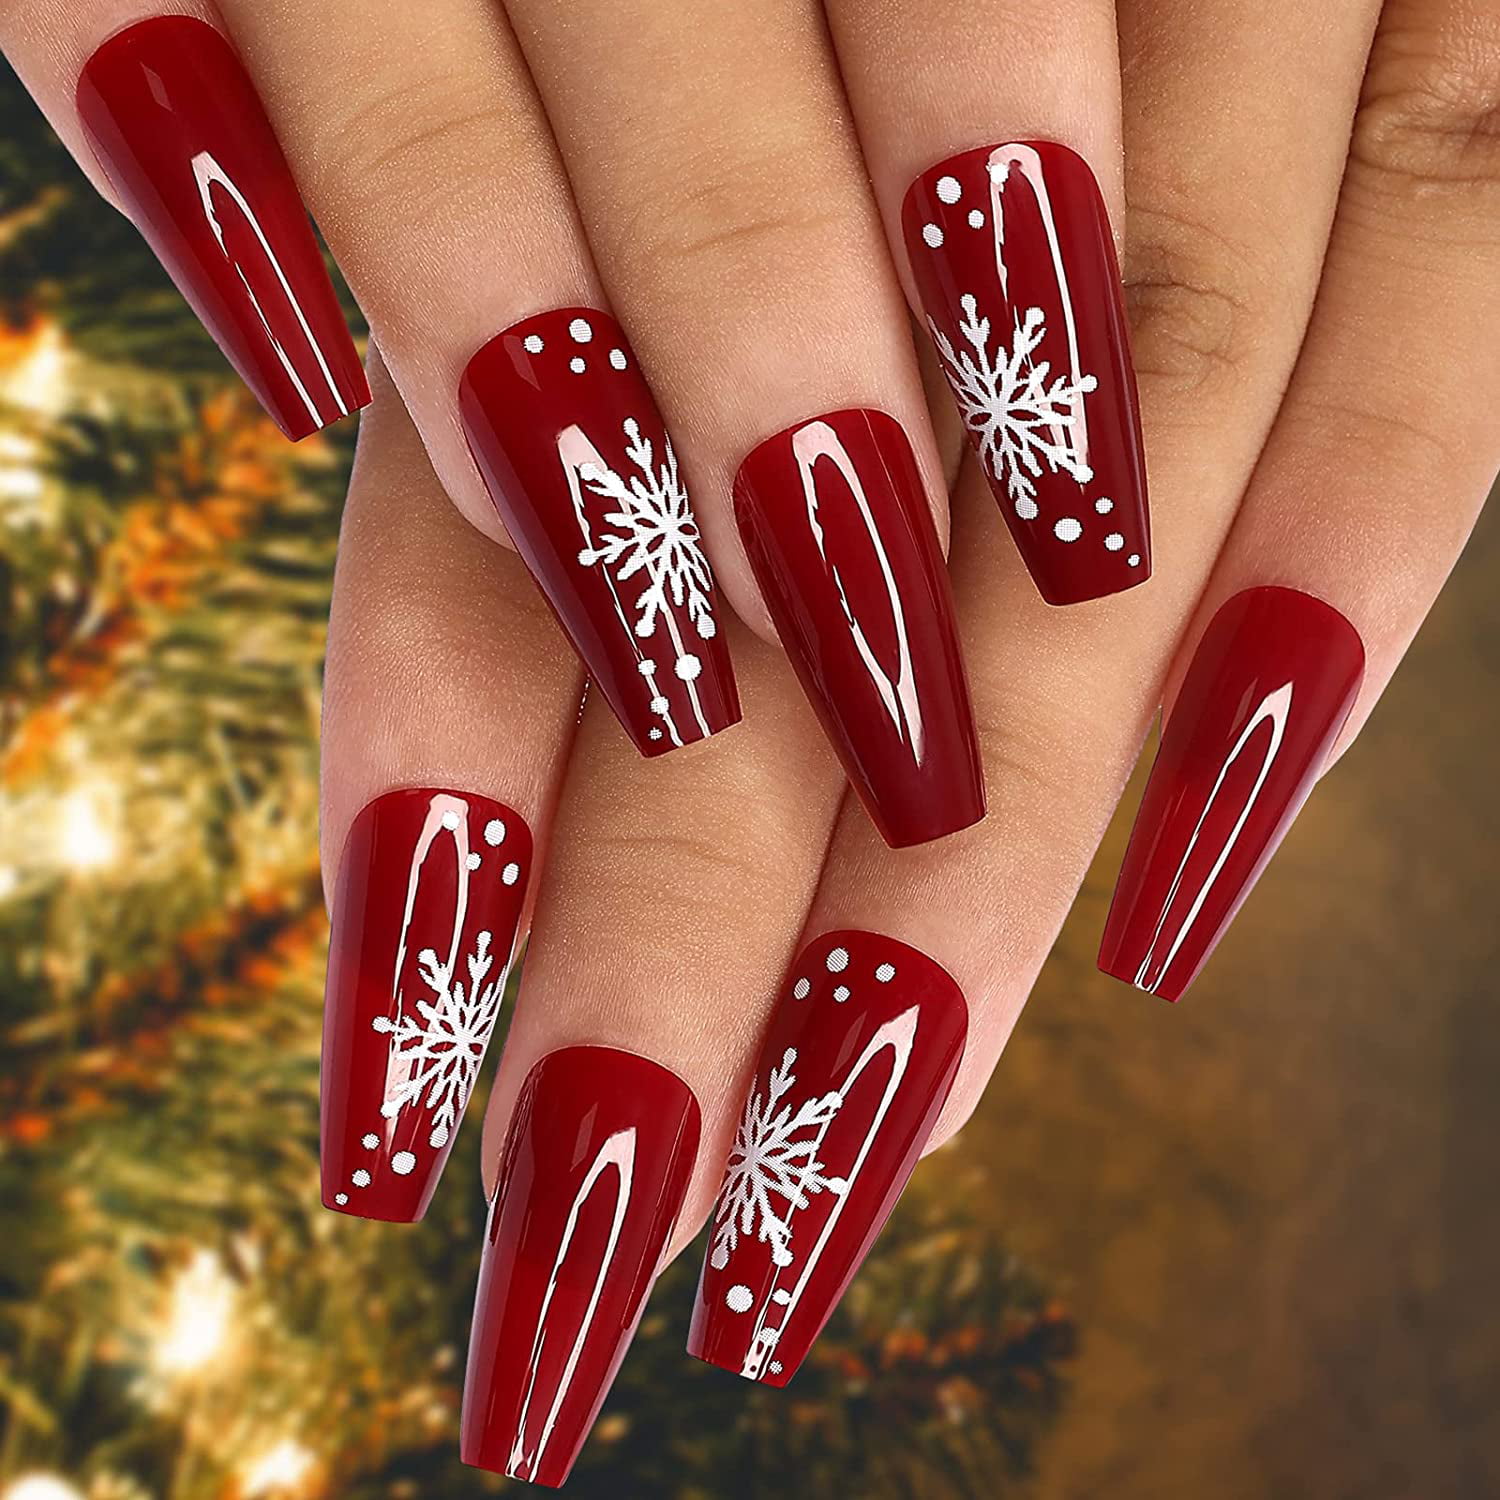 Coffin Press on Nails Christmas Pure Red Medium Fake Nails with Snowflakes Design on Nails for Women 24pcs Solid Burgundy Acrylic Artificial Cover False Nails (Red Snowflake) - Walmart.com